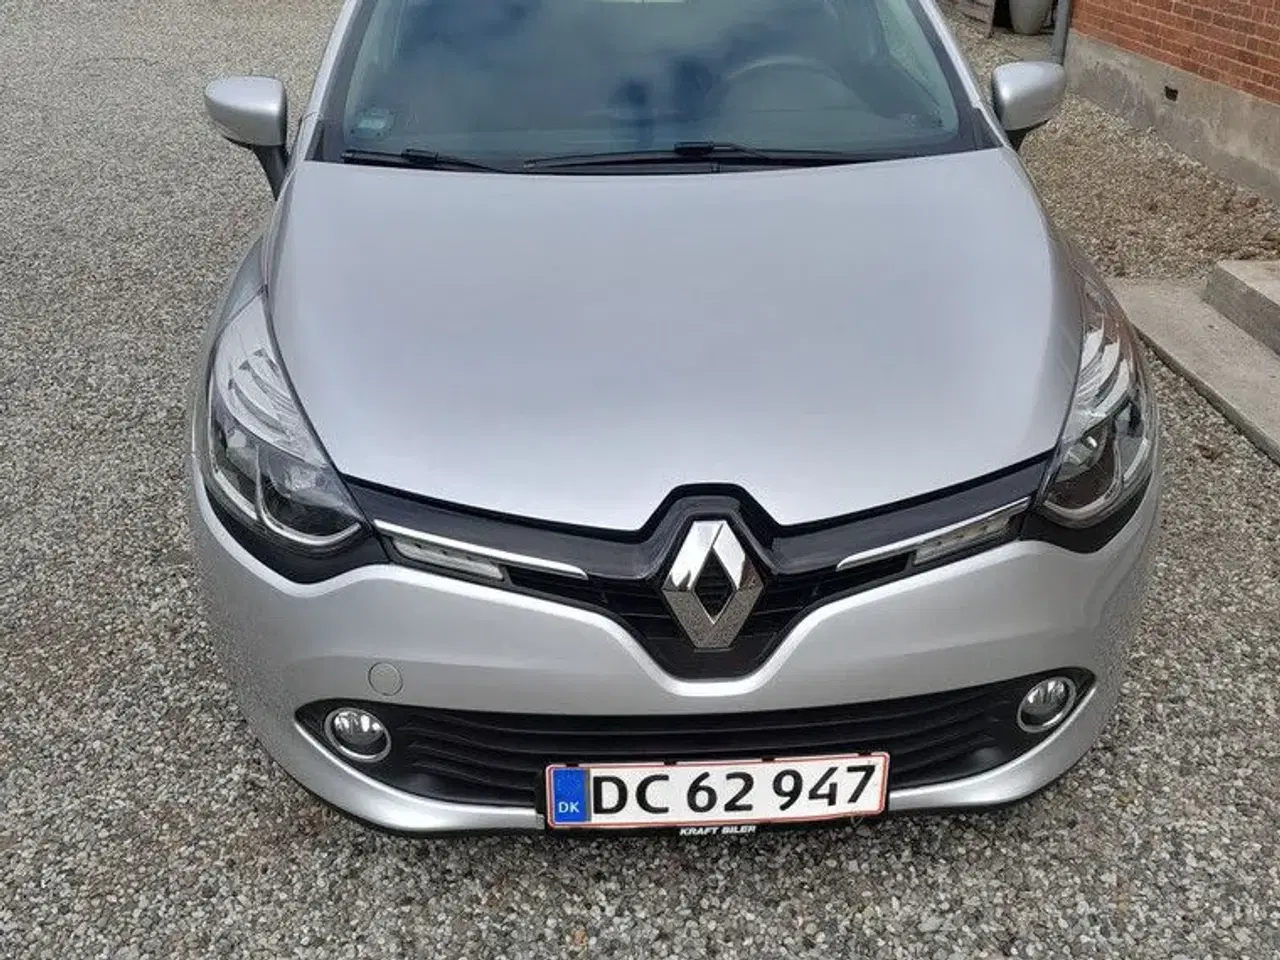 Billede 4 - Renault Ny Clio TCe 90 5d